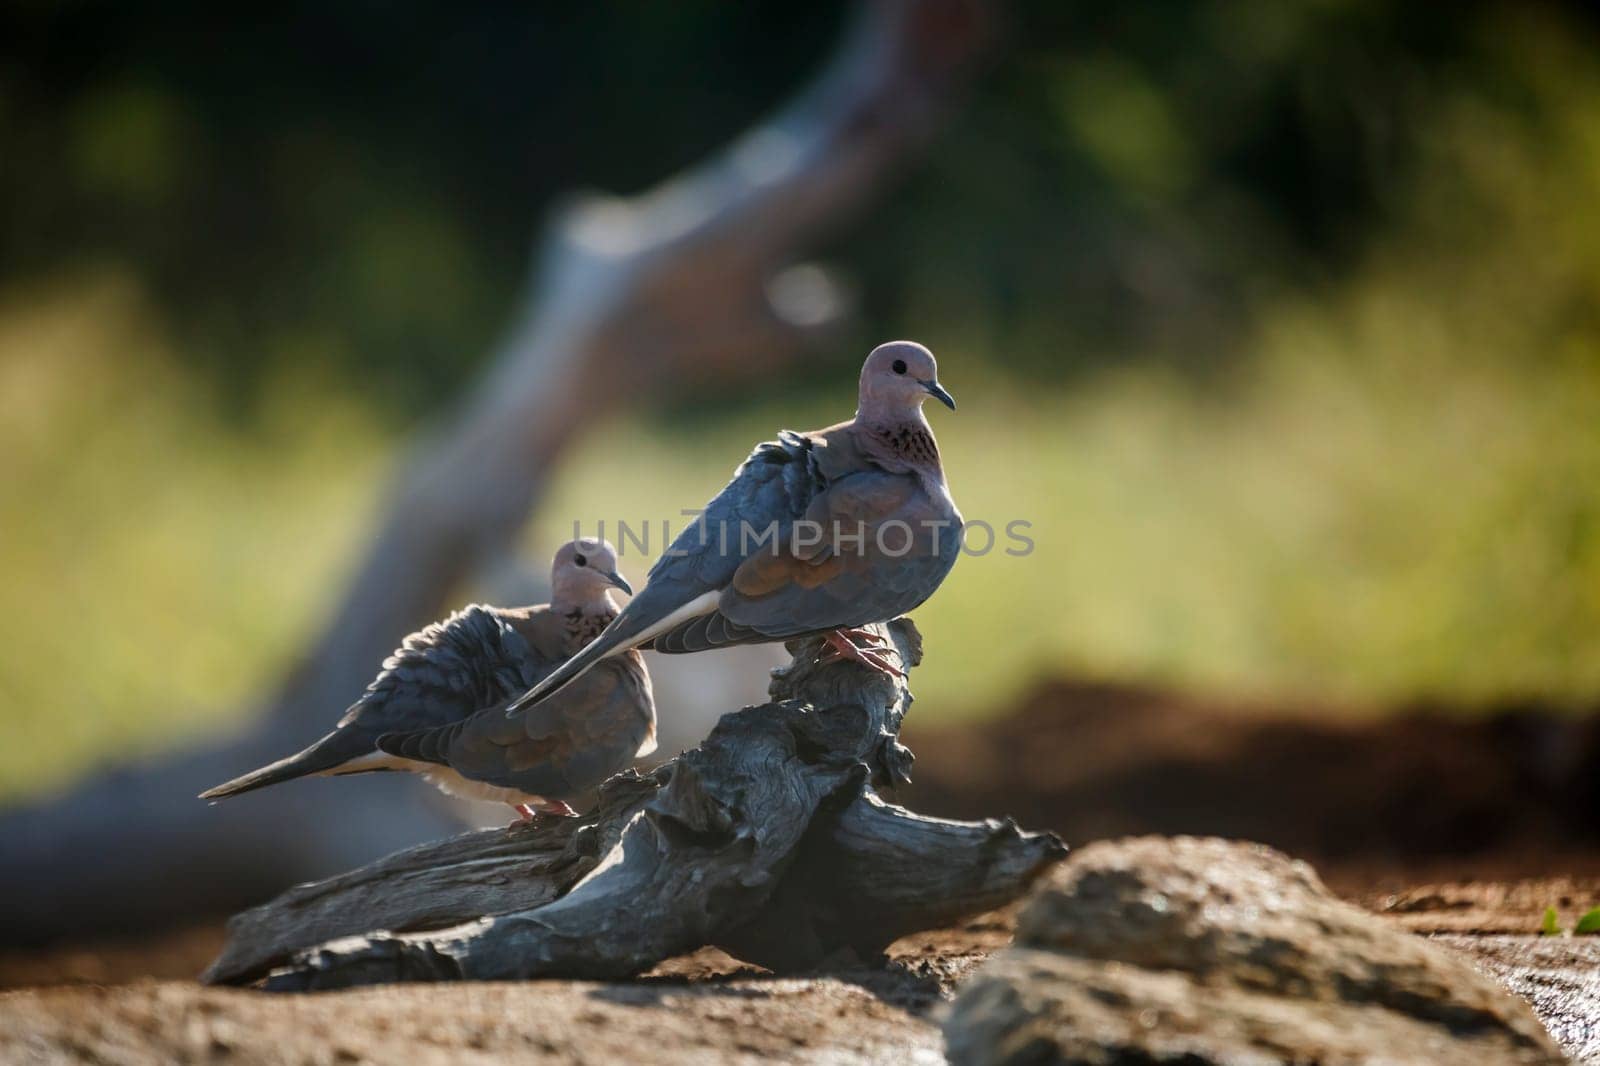 Laughing dove in Kruger National park, South Africa by PACOCOMO